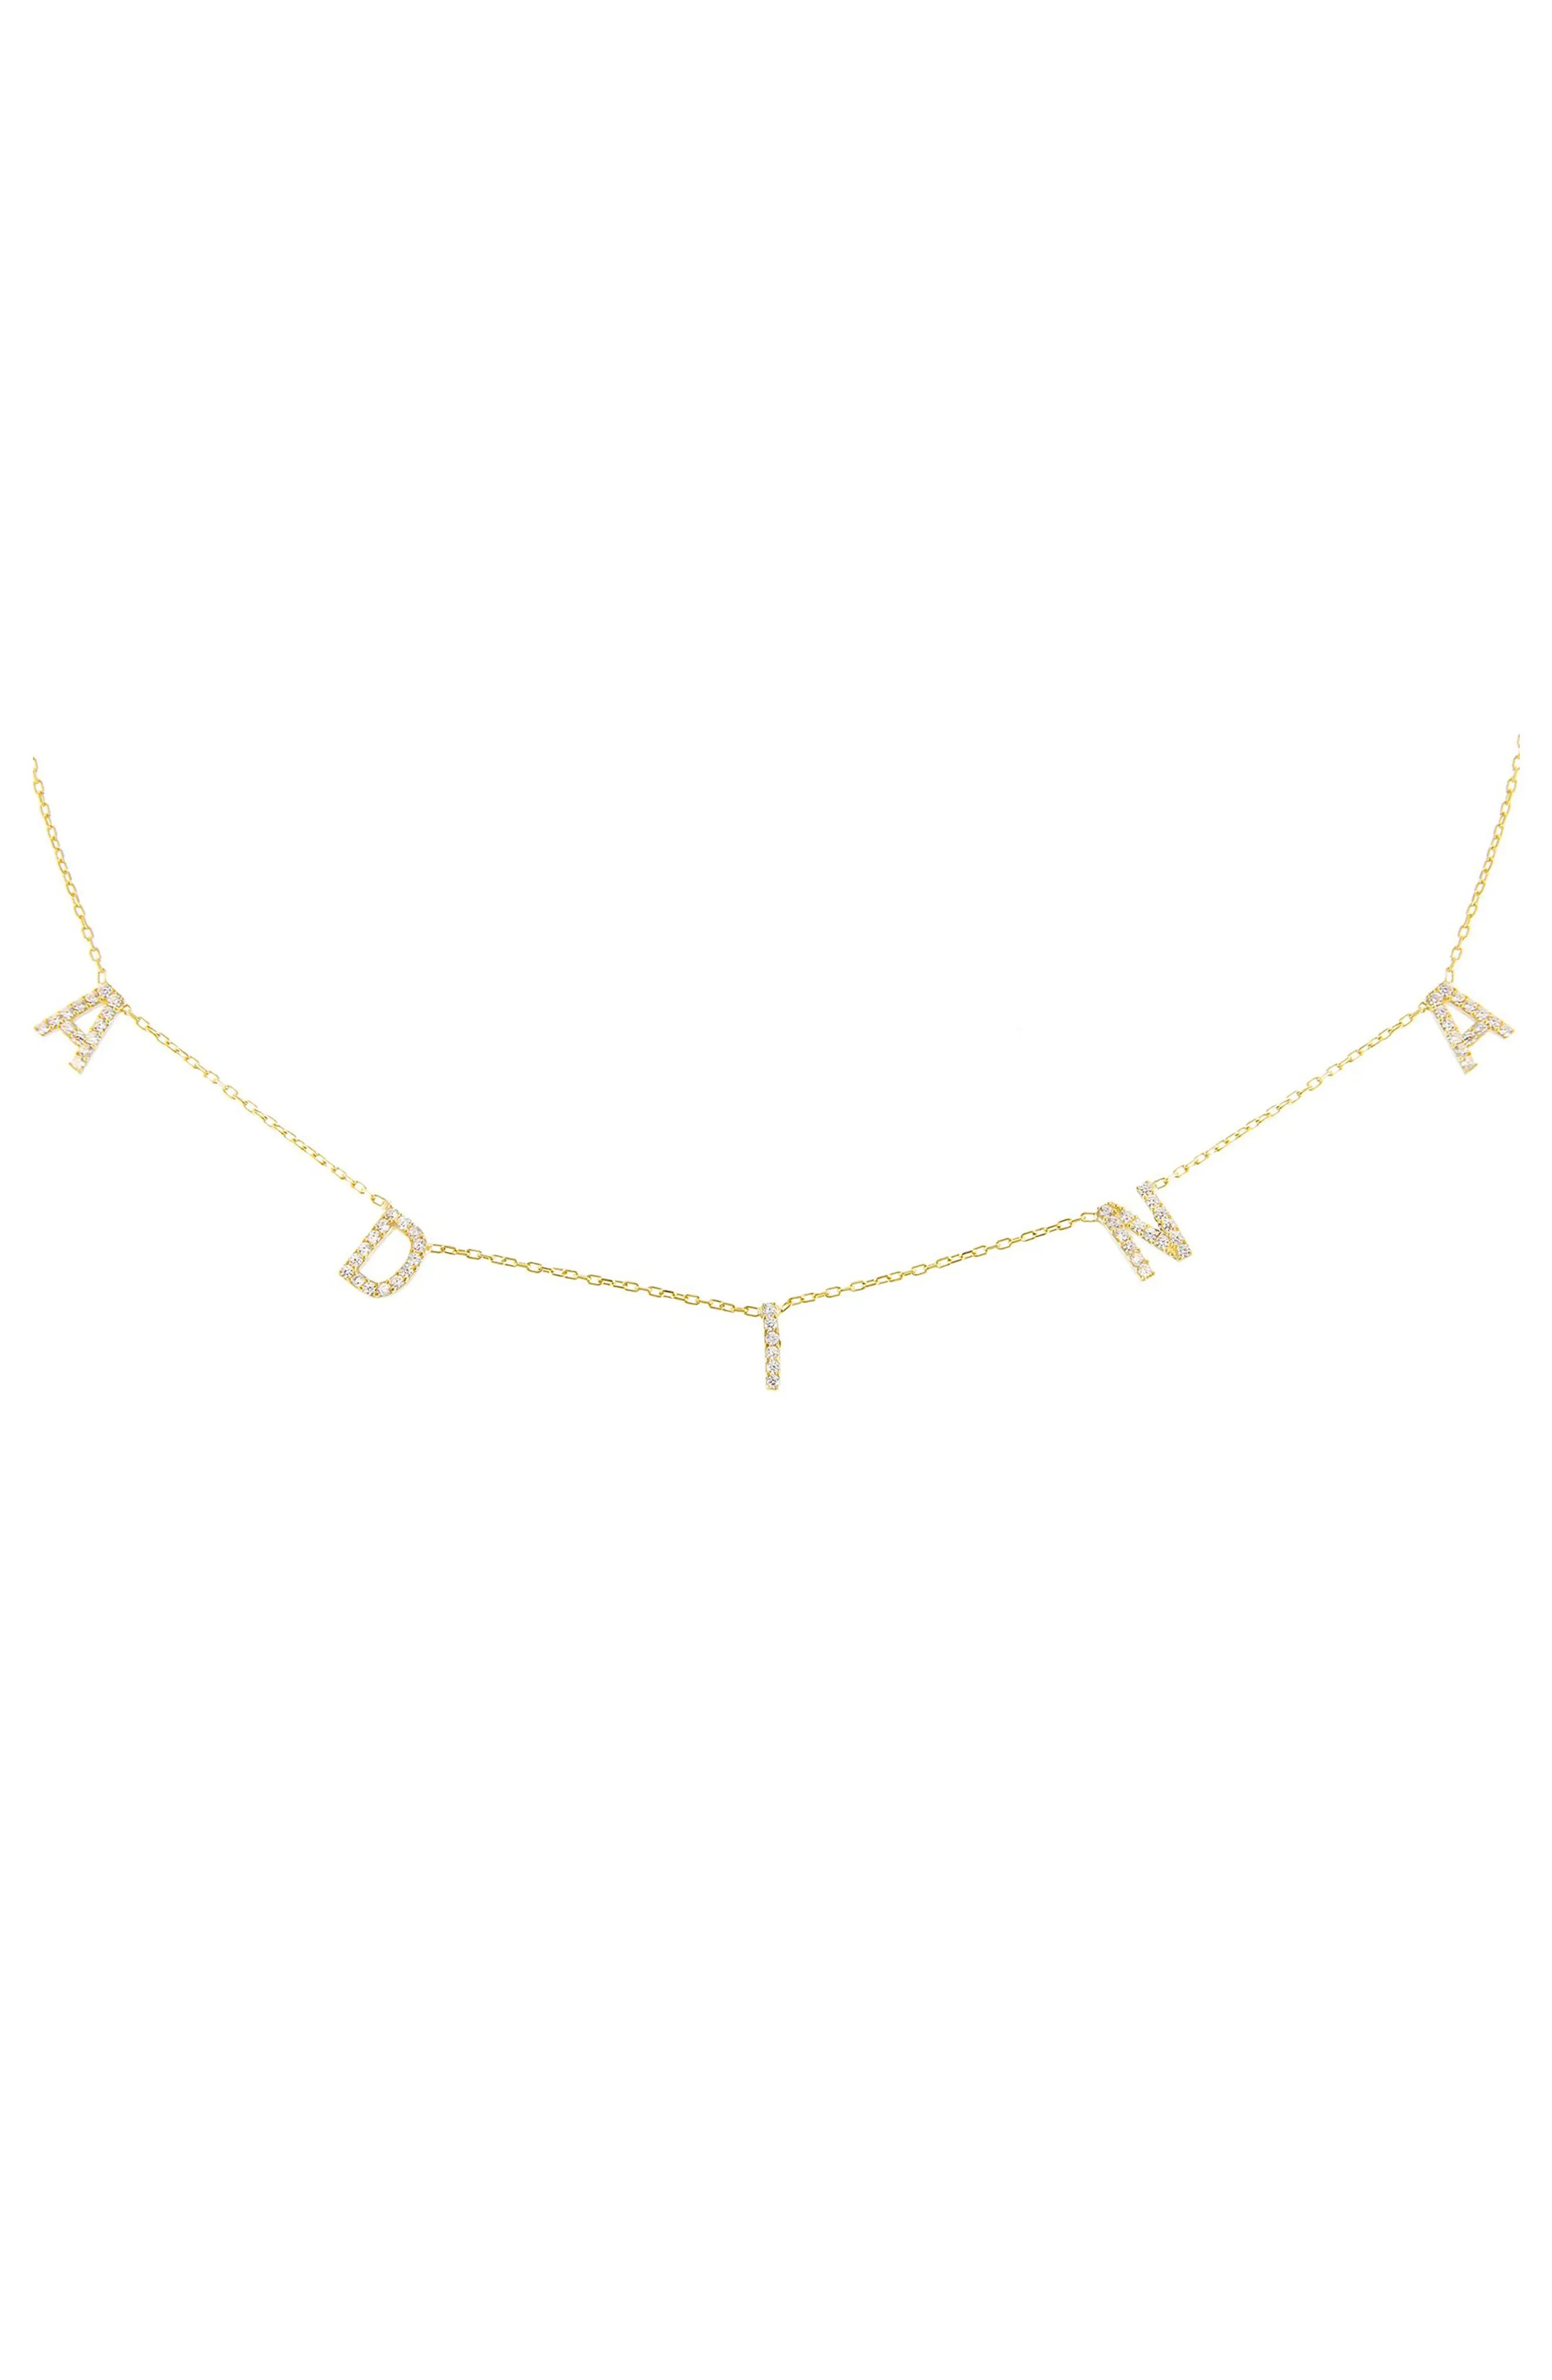 Women's Adina's Jewels Personalized Pave Block Name Station Necklace | Nordstrom